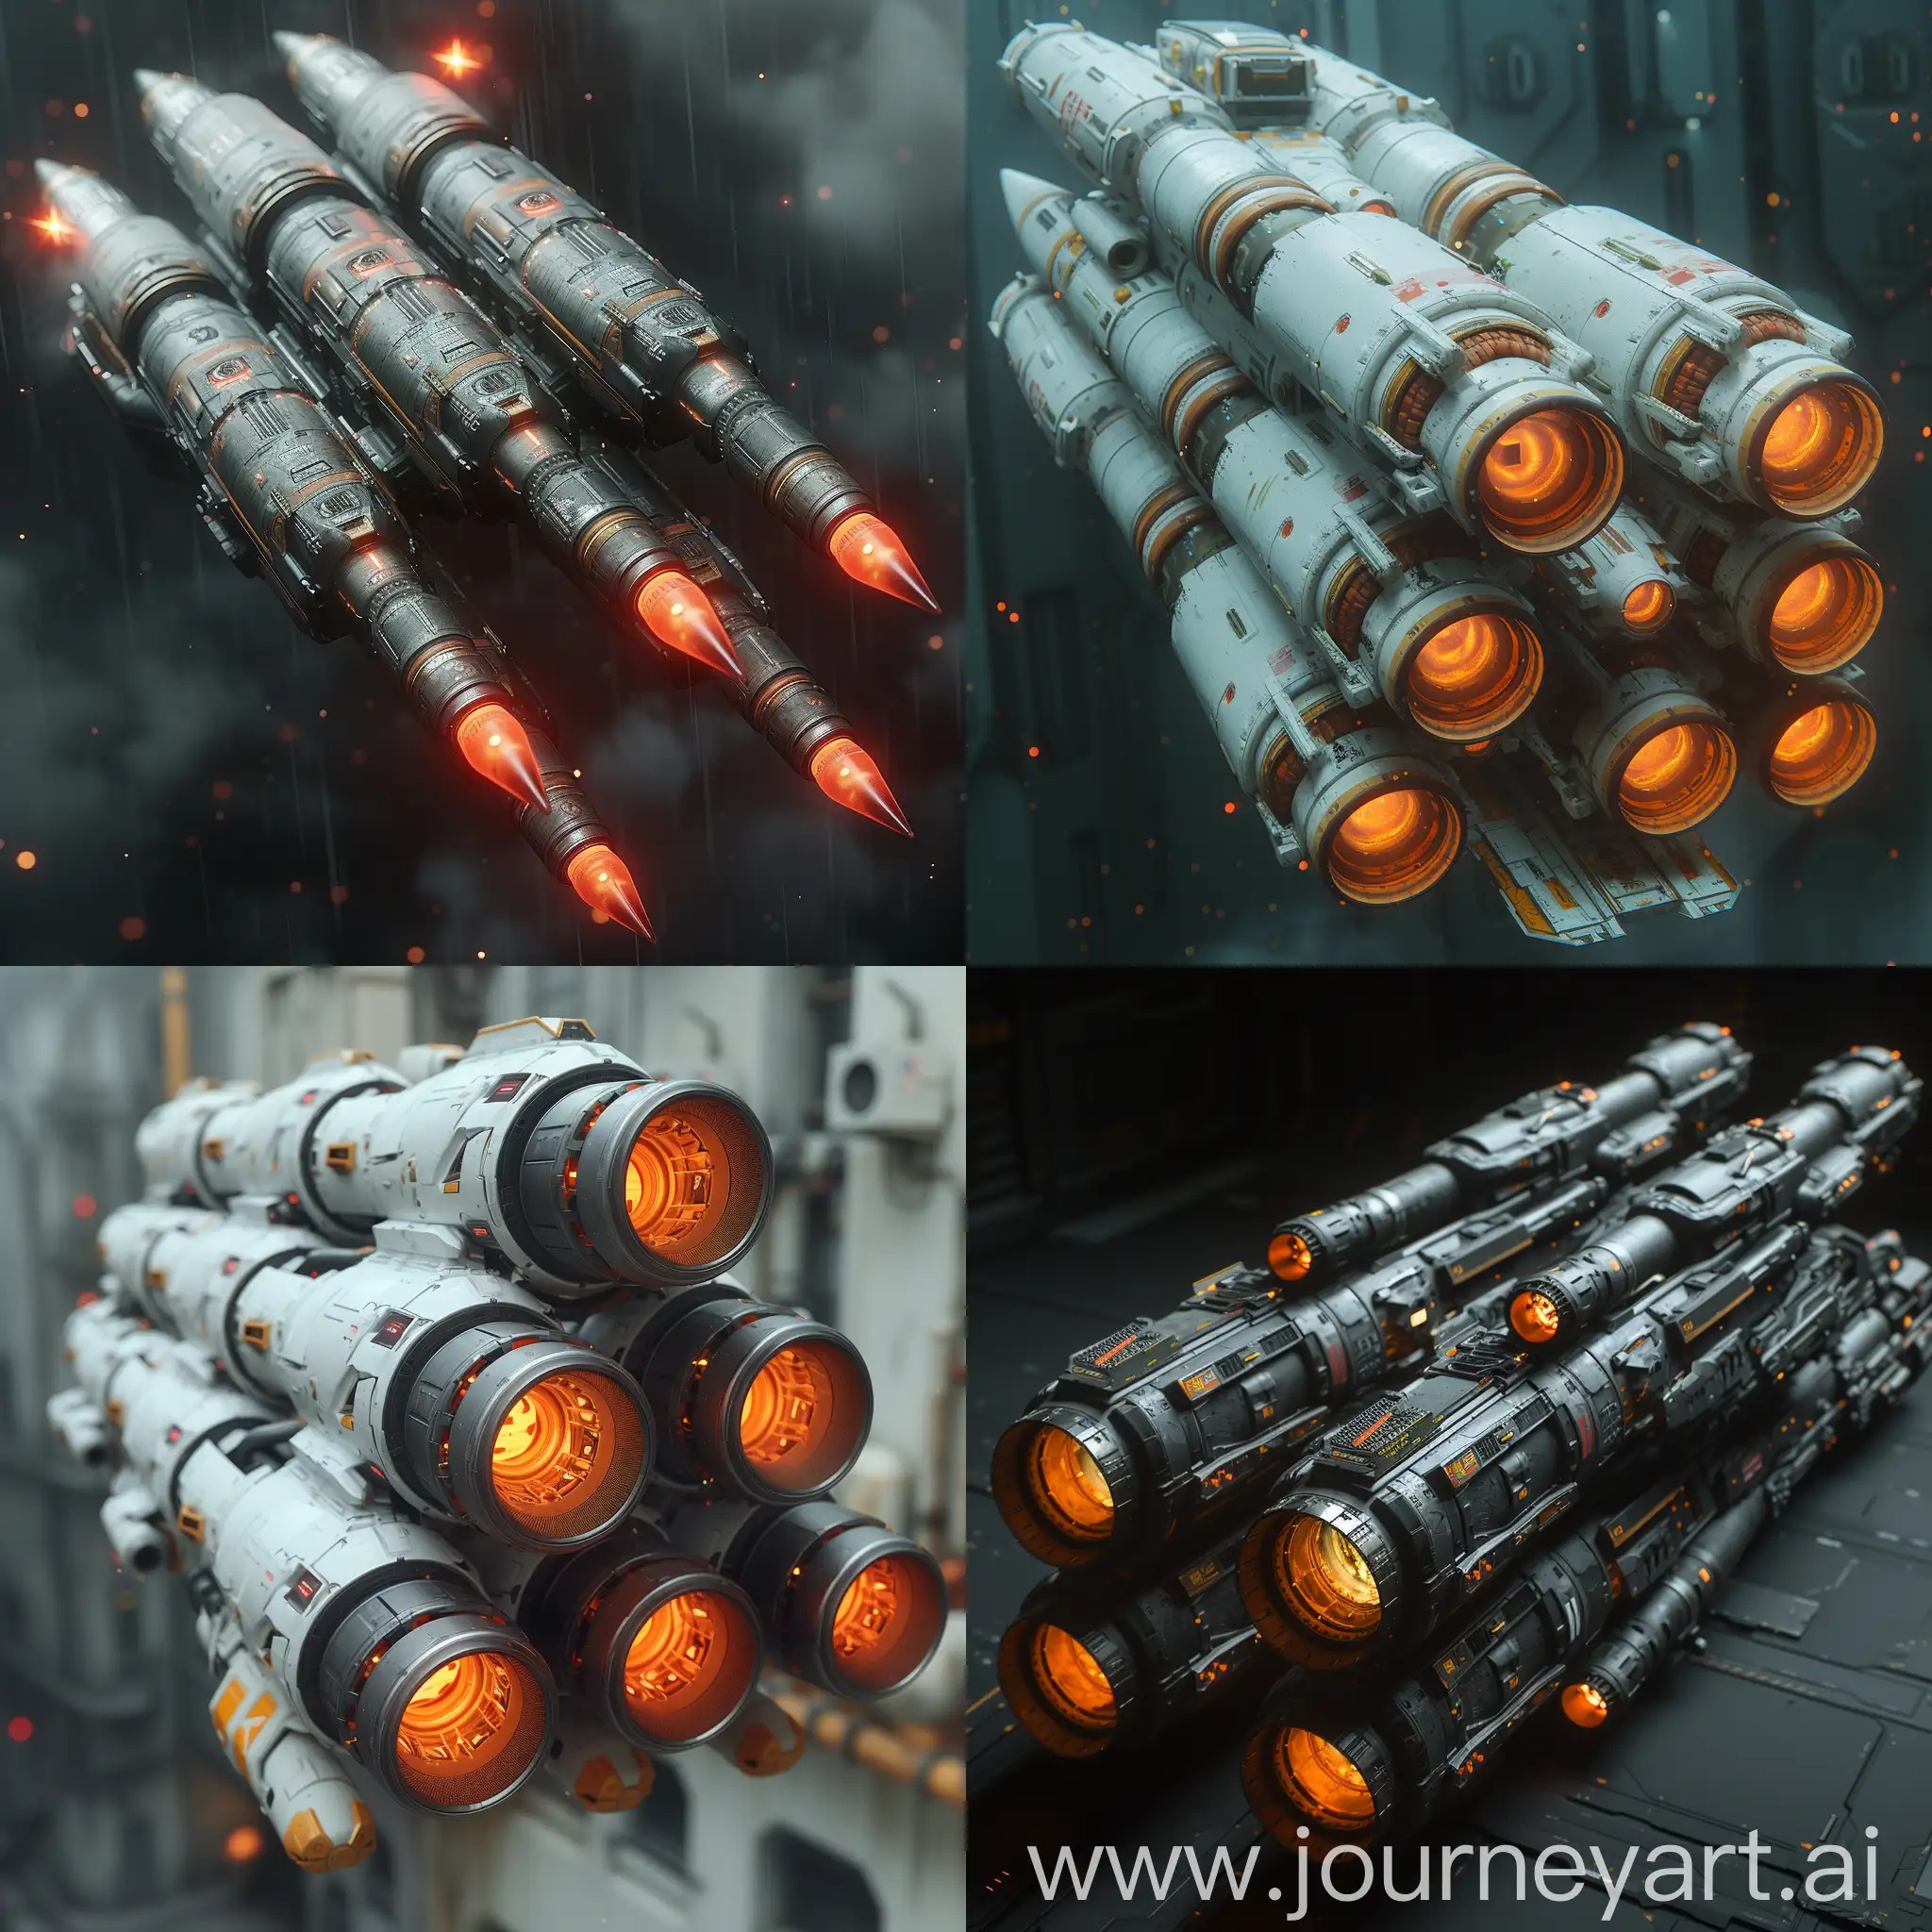 Futuristic-Multiple-Rocket-Launcher-with-Advanced-Targeting-Systems